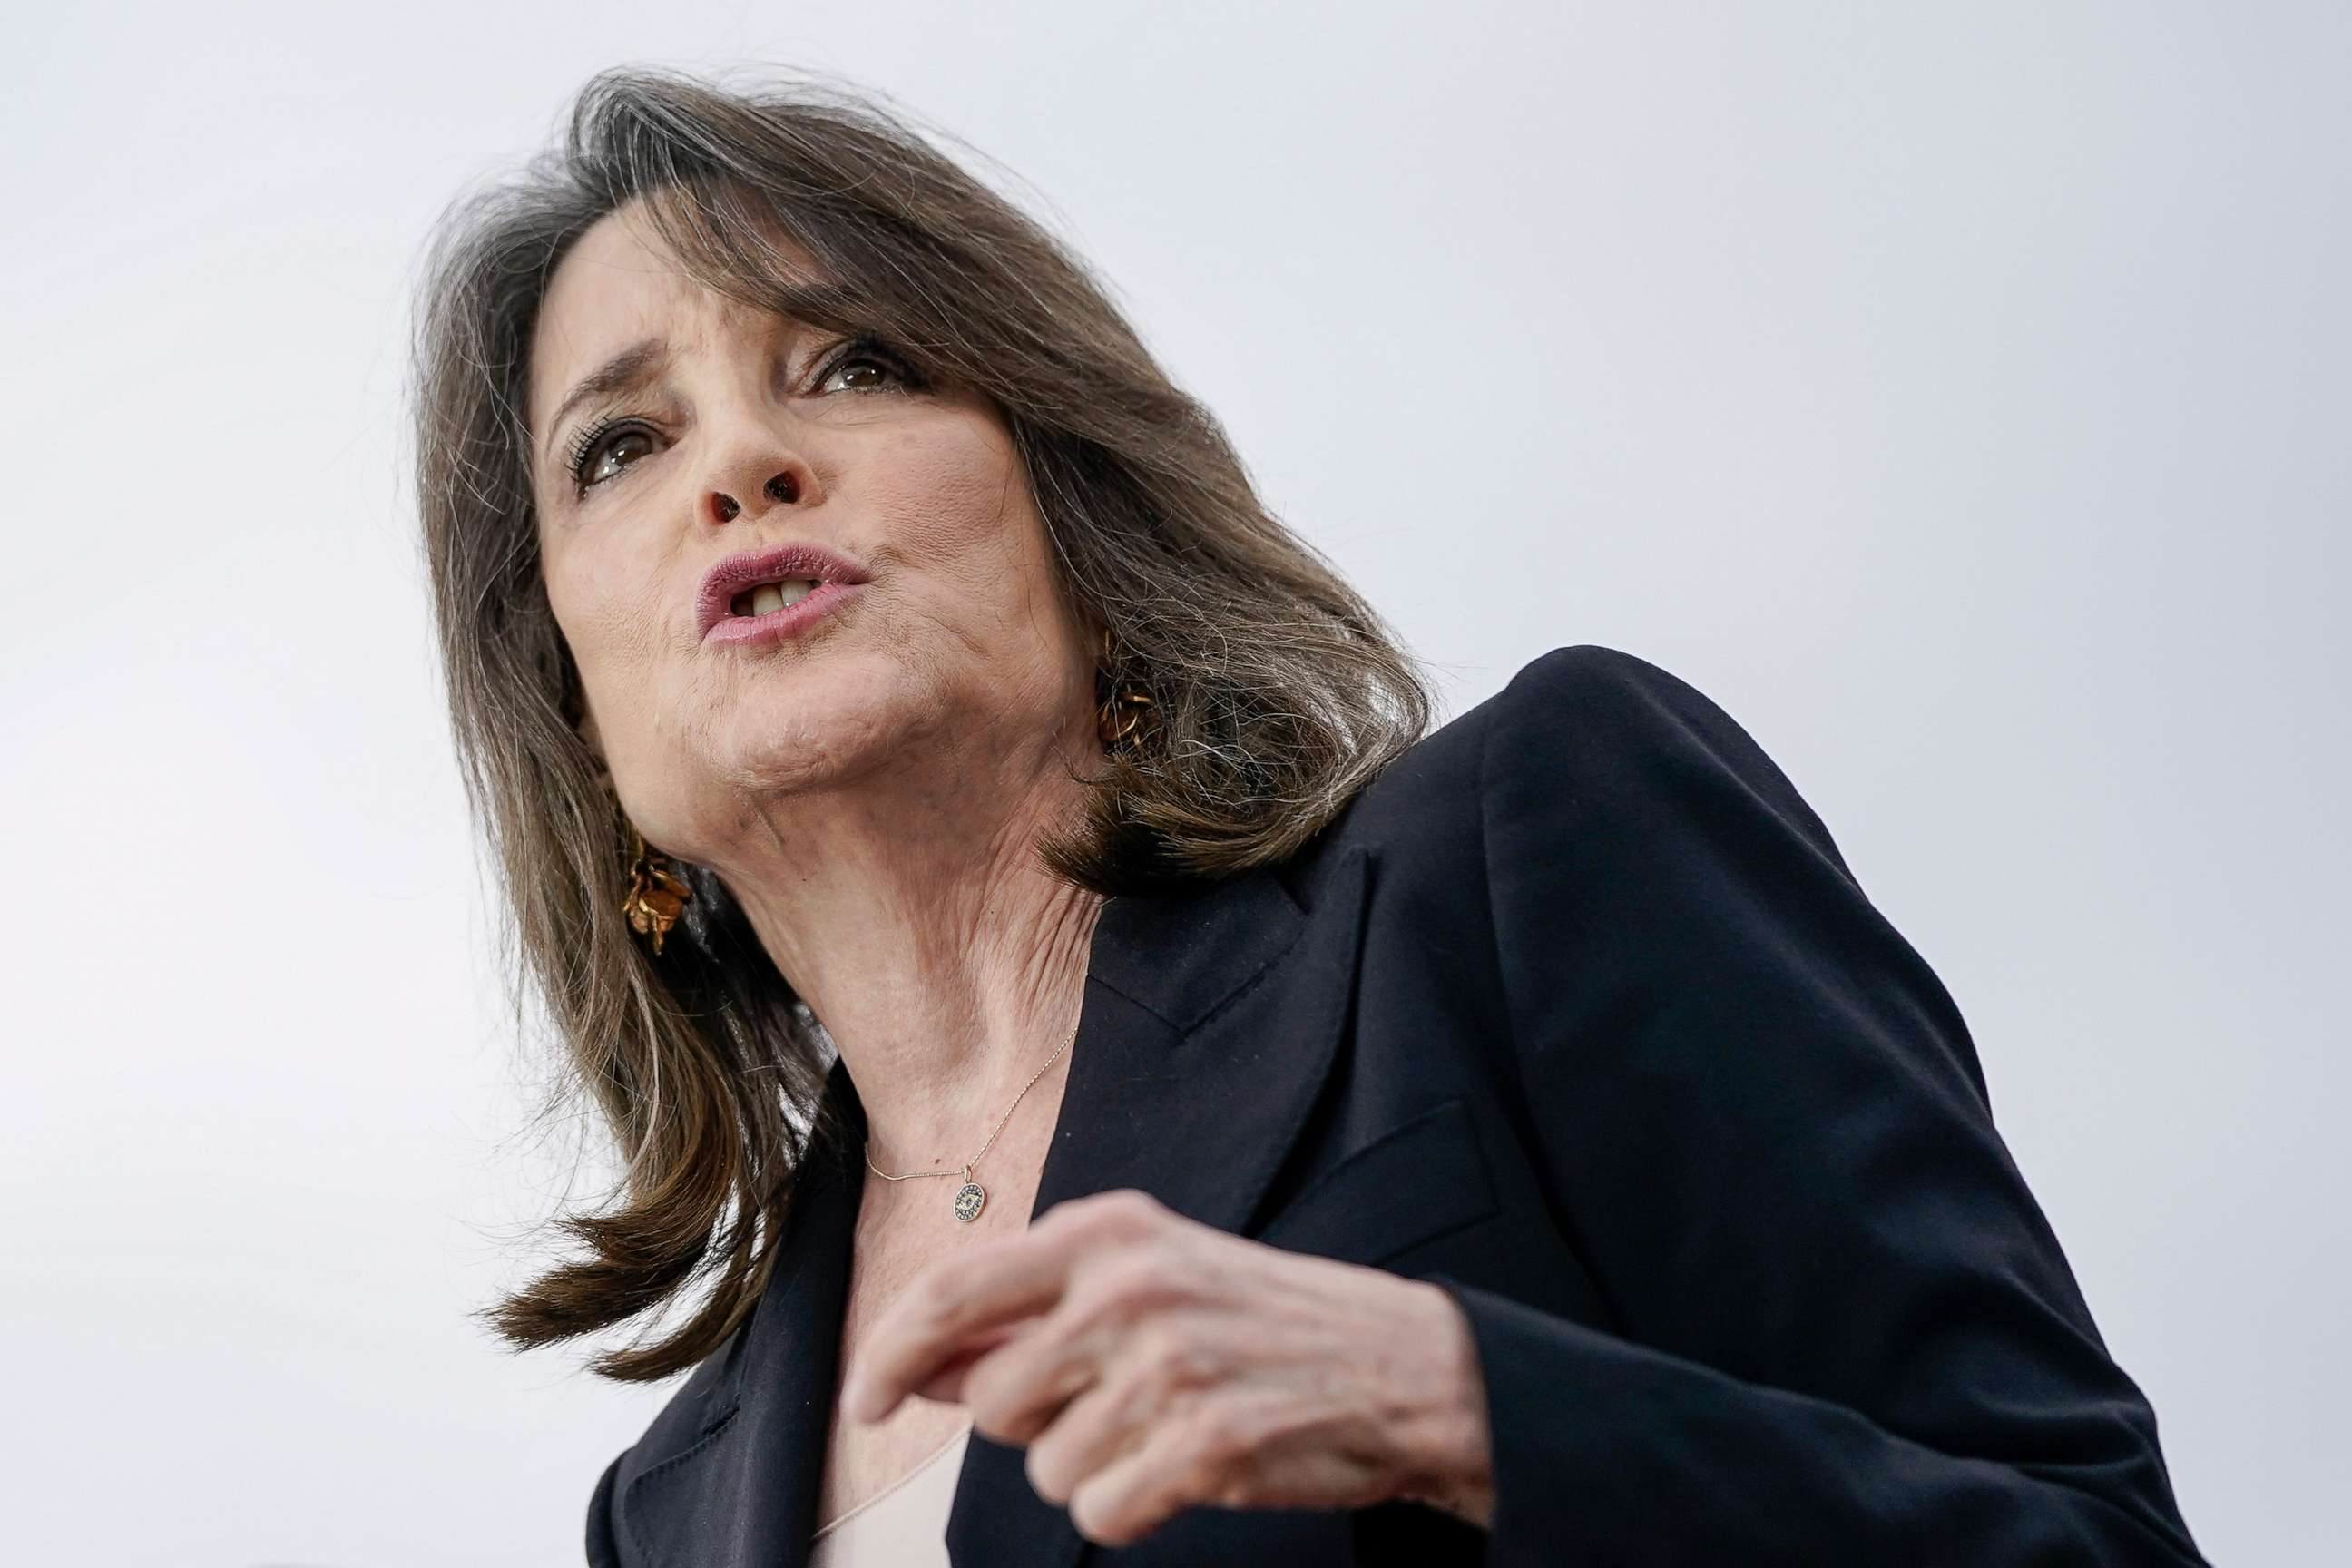 PHOTO: Marianne Williamson speaks as she endorses then-Democratic presidential candidate Sen. Bernie Sanders (I-VT) during a campaign rally at Vic Mathias Shores Park on Feb. 23, 2020 in Austin, Texas.